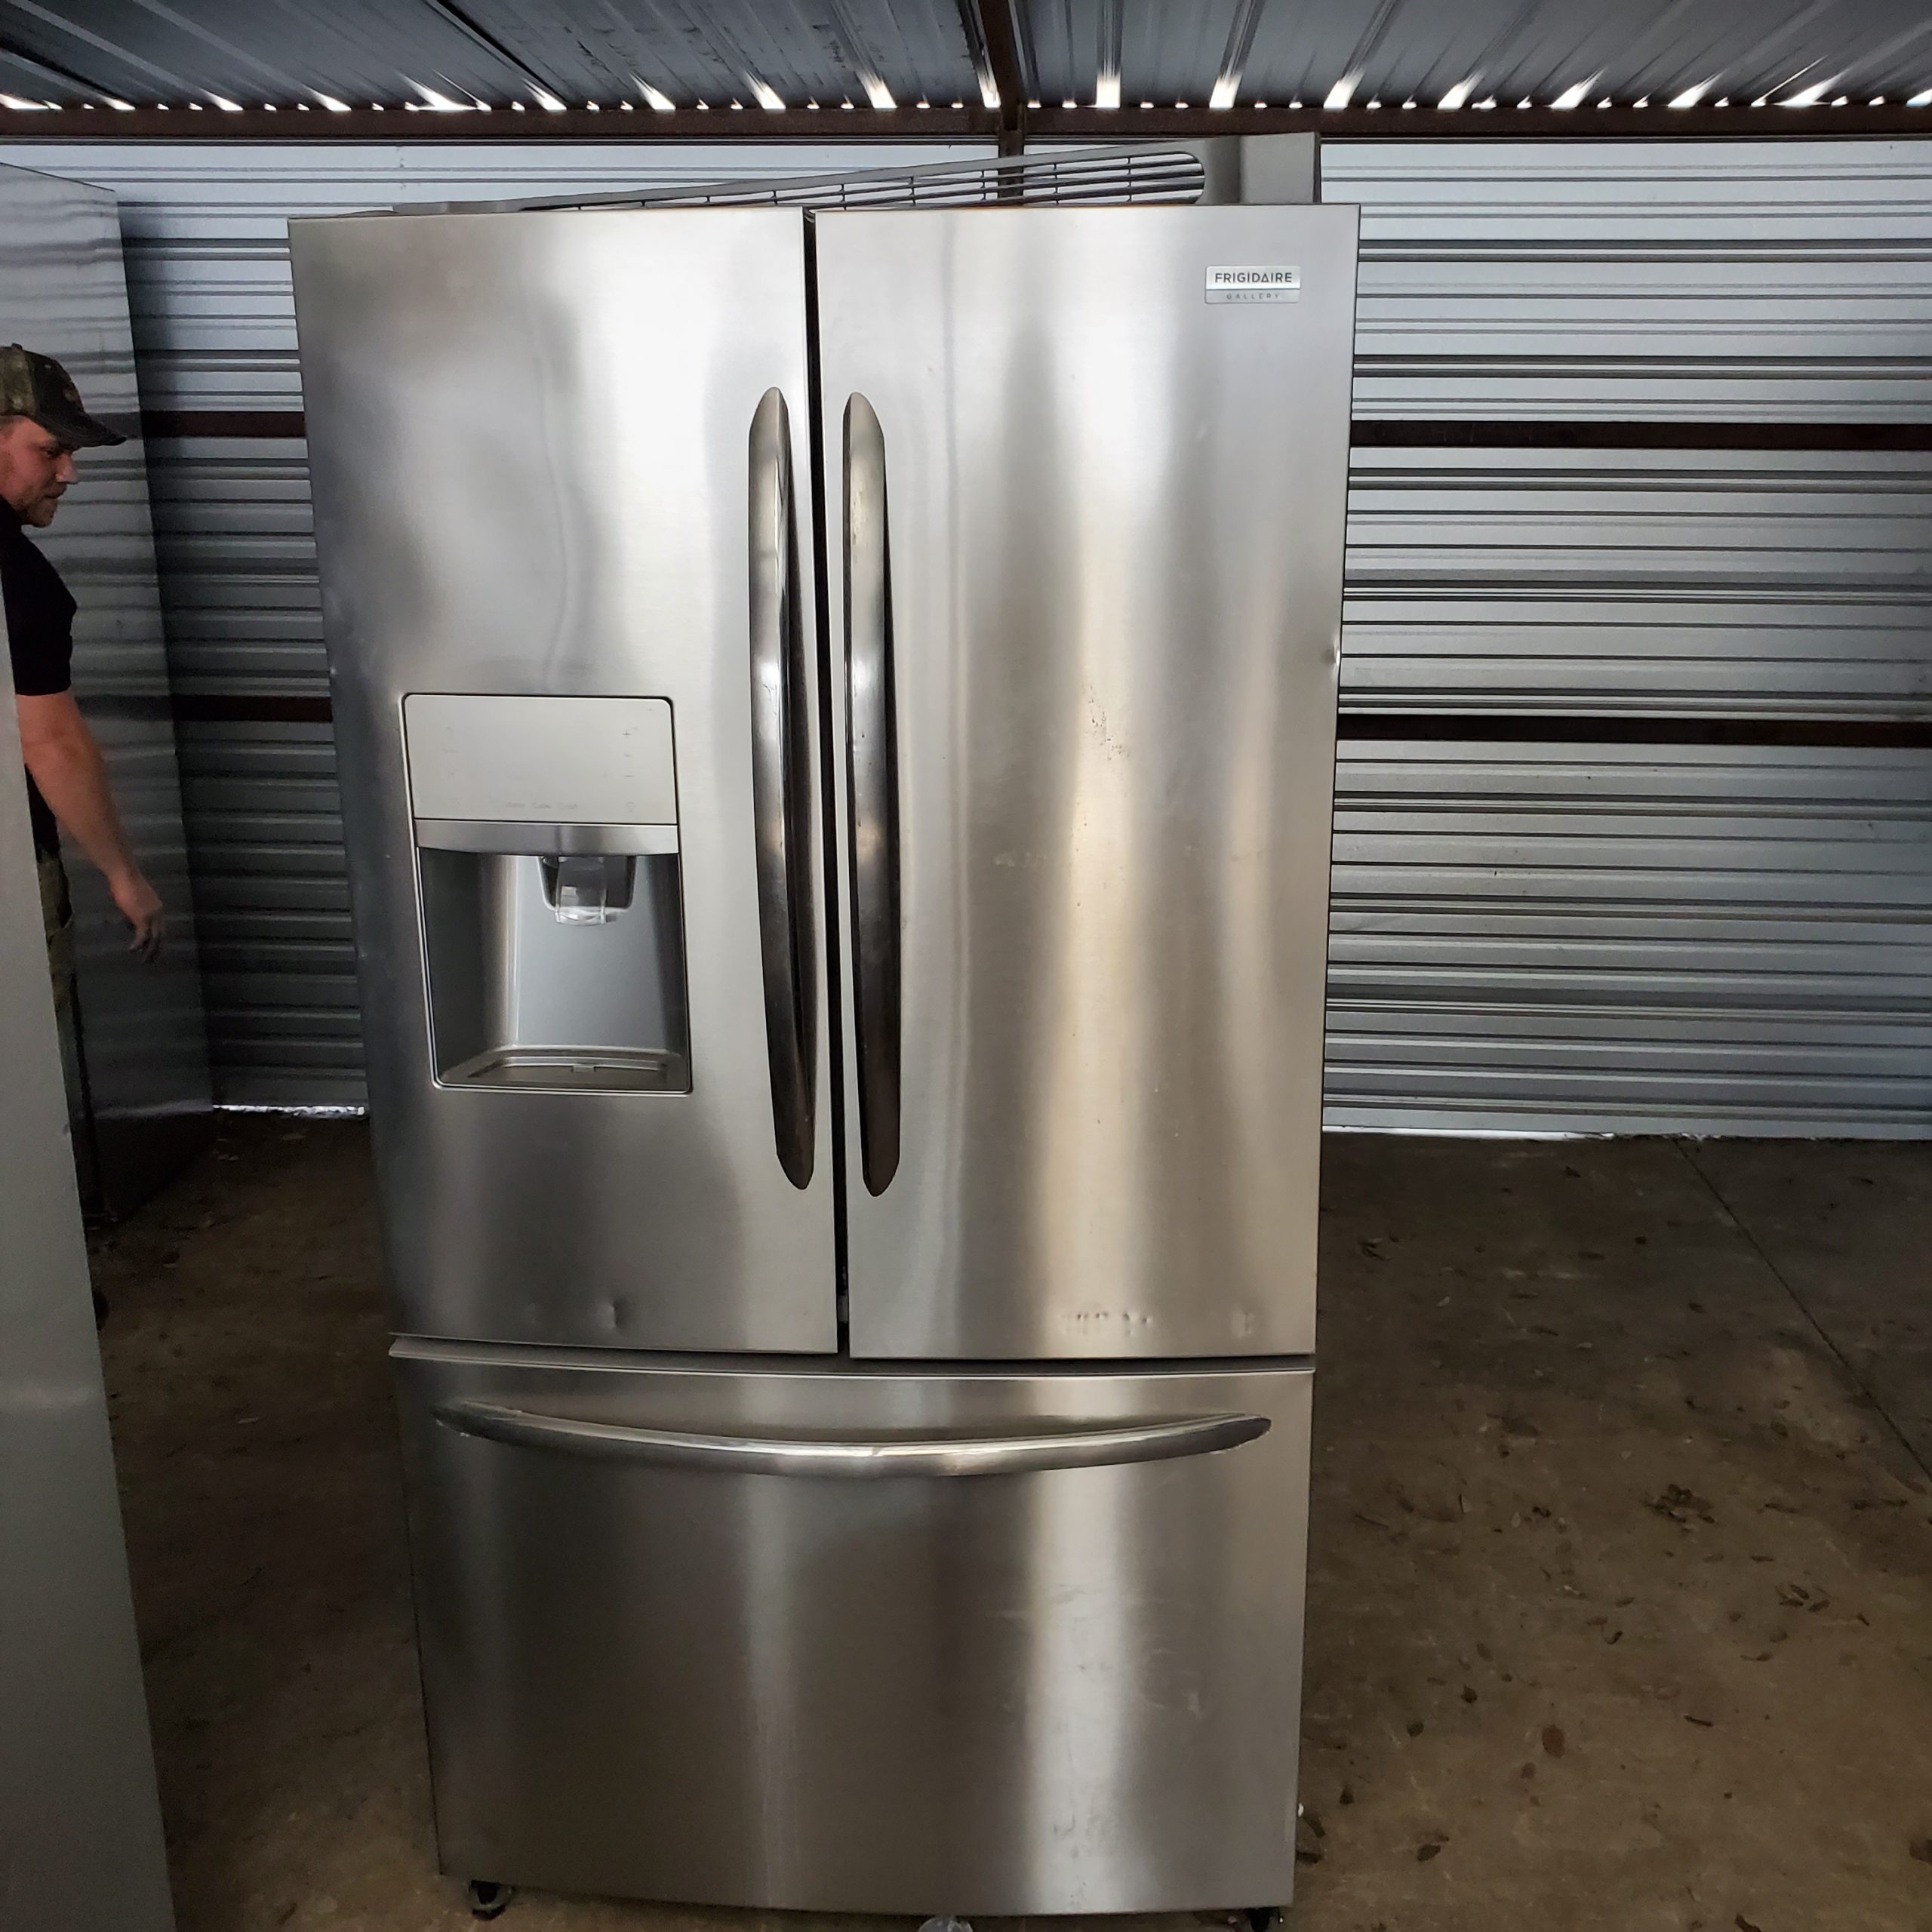 example of Frigidaire French door stainless steel refrigerator recently in our Salvage Wholesale program.